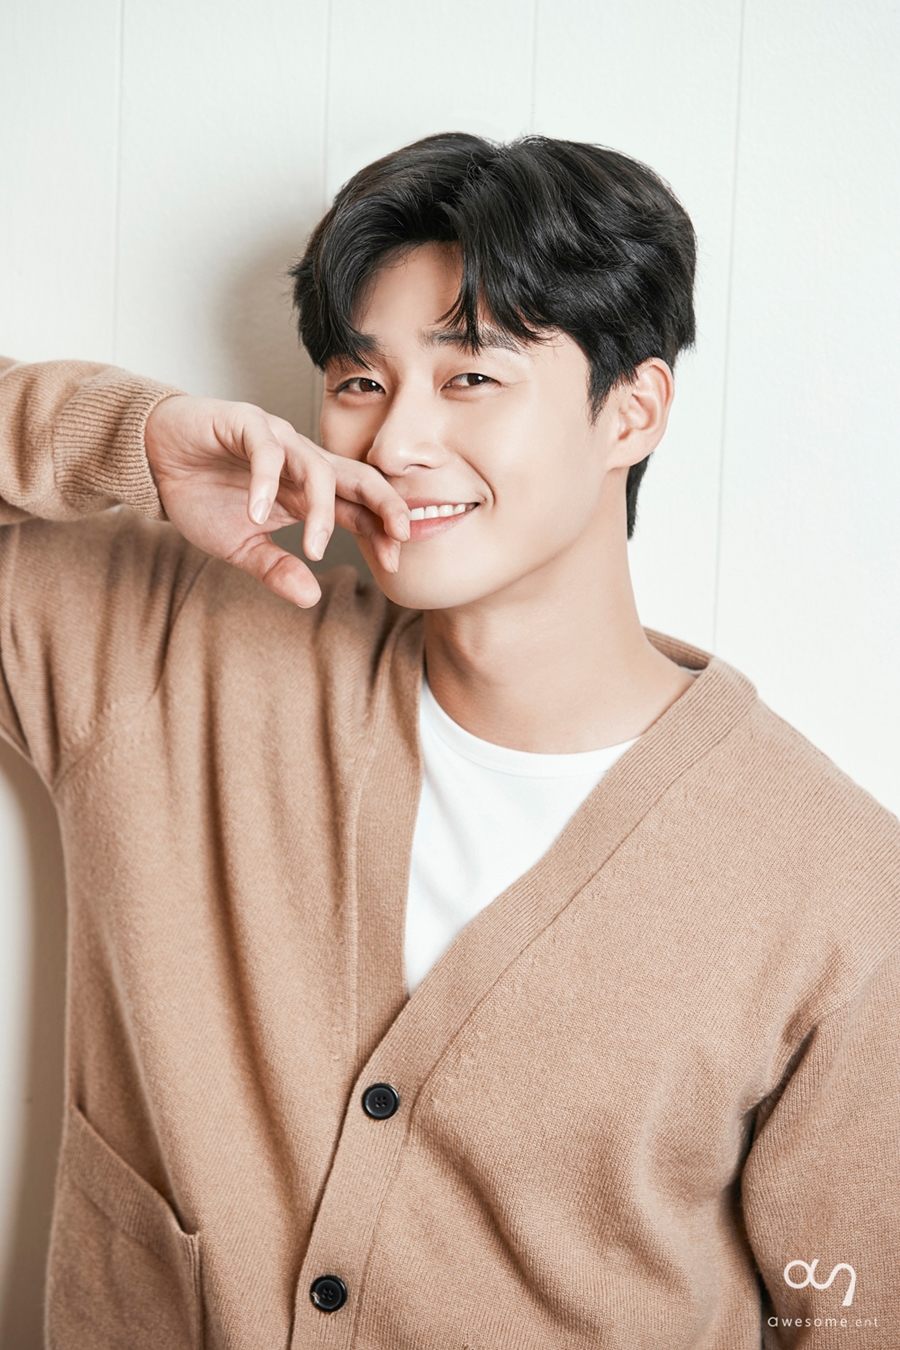 Actor Park Seo-joon confirmed the appearance of JTBCs new gilt Drama ItaeOne Clath.On August 18, the agency Awesome E & T said, Park Seo-joon will confirm ItaeOne Clath as his next work and return to the house theater.The Drama ItaeOne Clath is a work that depicts the hip rebellion of youths who are united in an unreasonable world, stubbornness and popularity.Based on the next webtoon of the same name, their entrepreneurial myth that pursues freedom with their own values ​​is unfolded in the small streets of ItaeOne, which seems to have compressed the world.Park Seo-jun is divided into a straight-line young man Park Sae-roi who does not compromise on injustice. Park Sae-roi is a person who begins a new dream challenge on the streets of ItaeOne, which entered with undying anger.It will convey pleasant fun, impression, and thrilling catharsis through the charm of Park Sae-roi, who is more confident and full of excitement than anyone else.Park Seo-joon said, Park is a good person who strives every moment while keeping his conviction.I am burdened because it is considered as a life character of many people who have seen the original work, but I wanted to challenge it because it is such an attractive person.  The challenge and growth of various characters appearing in ItaeOne Clath I expect to get a lot of sympathy and support from viewers.I will prepare hard so that I can be remembered as a good Drama. Park Seo-joon proved that he is an Actor who believes in his own color by charmingly digesting various characters such as the youth fighter of the Drama Ssam, My Way, the vice chairman of the narcissist of Why is Kim Secretary, and the police officer of the movie Youth Police.In particular, recently, he has been greatly loved both at home and abroad, receiving the Minister of Culture and Tourisms commendation of the 2018 Star of Korea Tourism and the 13th Asian Film Awards (AFA) Rising Star Award.Therefore, there is a growing expectation that this work will convey freshness with new charm.In addition, the movie Lion, which is scheduled to open on the 31st, will show another differentiated charm from ItaeOne Clath, which is disassembled as a martial arts champion against evil.ItaeOne Clath, starring Park Seo-joon, Kim Dae-mi and Yoo Jae-myeong, will be broadcasted first following JTBCs new gilt Drama Chocolate.